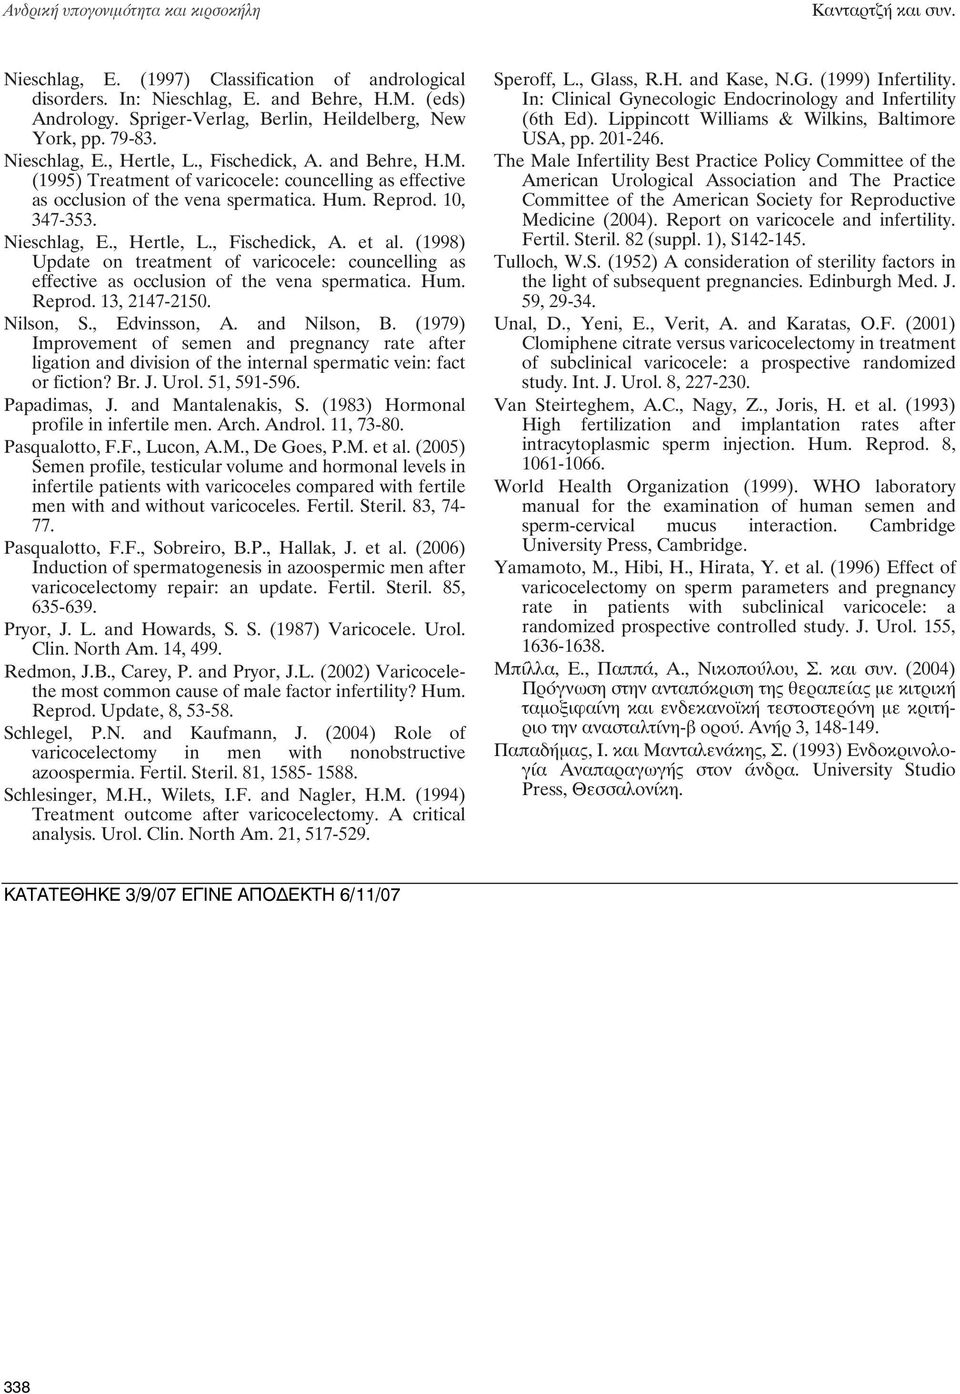 (1995) Treatment of varicocele: councelling as effective as occlusion of the vena spermatica. Hum. Reprod. 10, 347-353. Νieschlag, E., Hertle, L., Fischedick, A. et al.